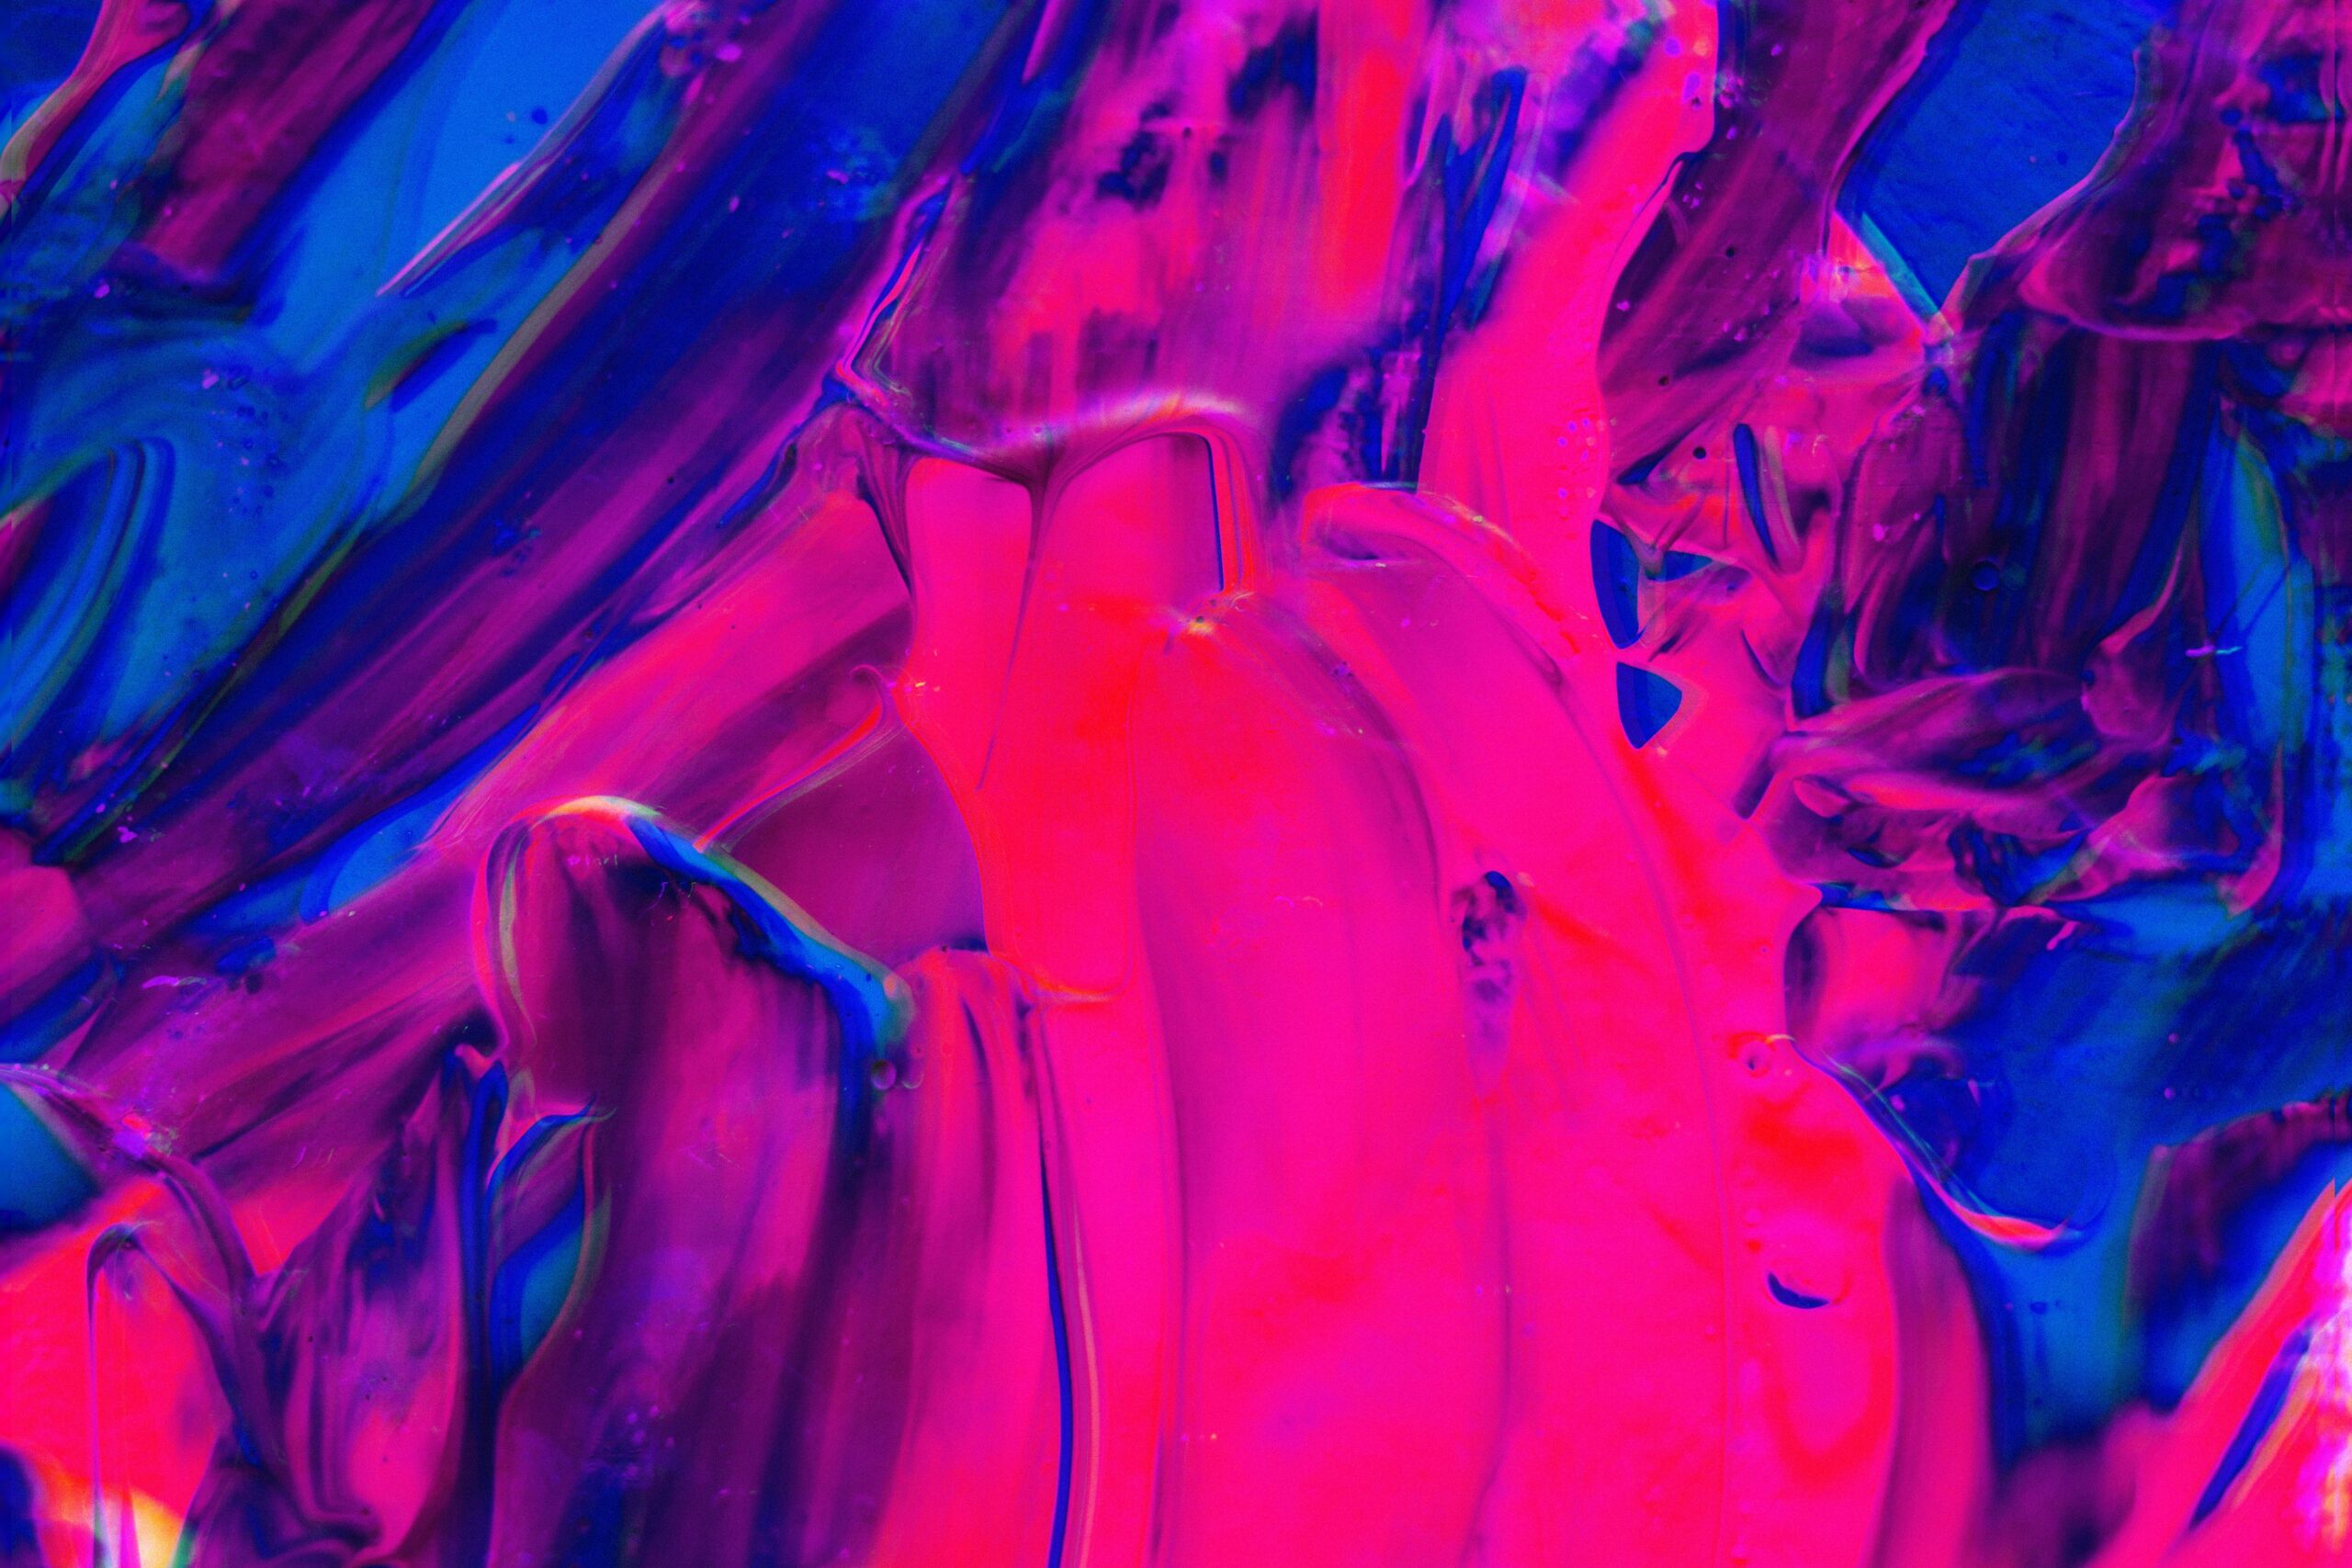 Abstract pink and blue image